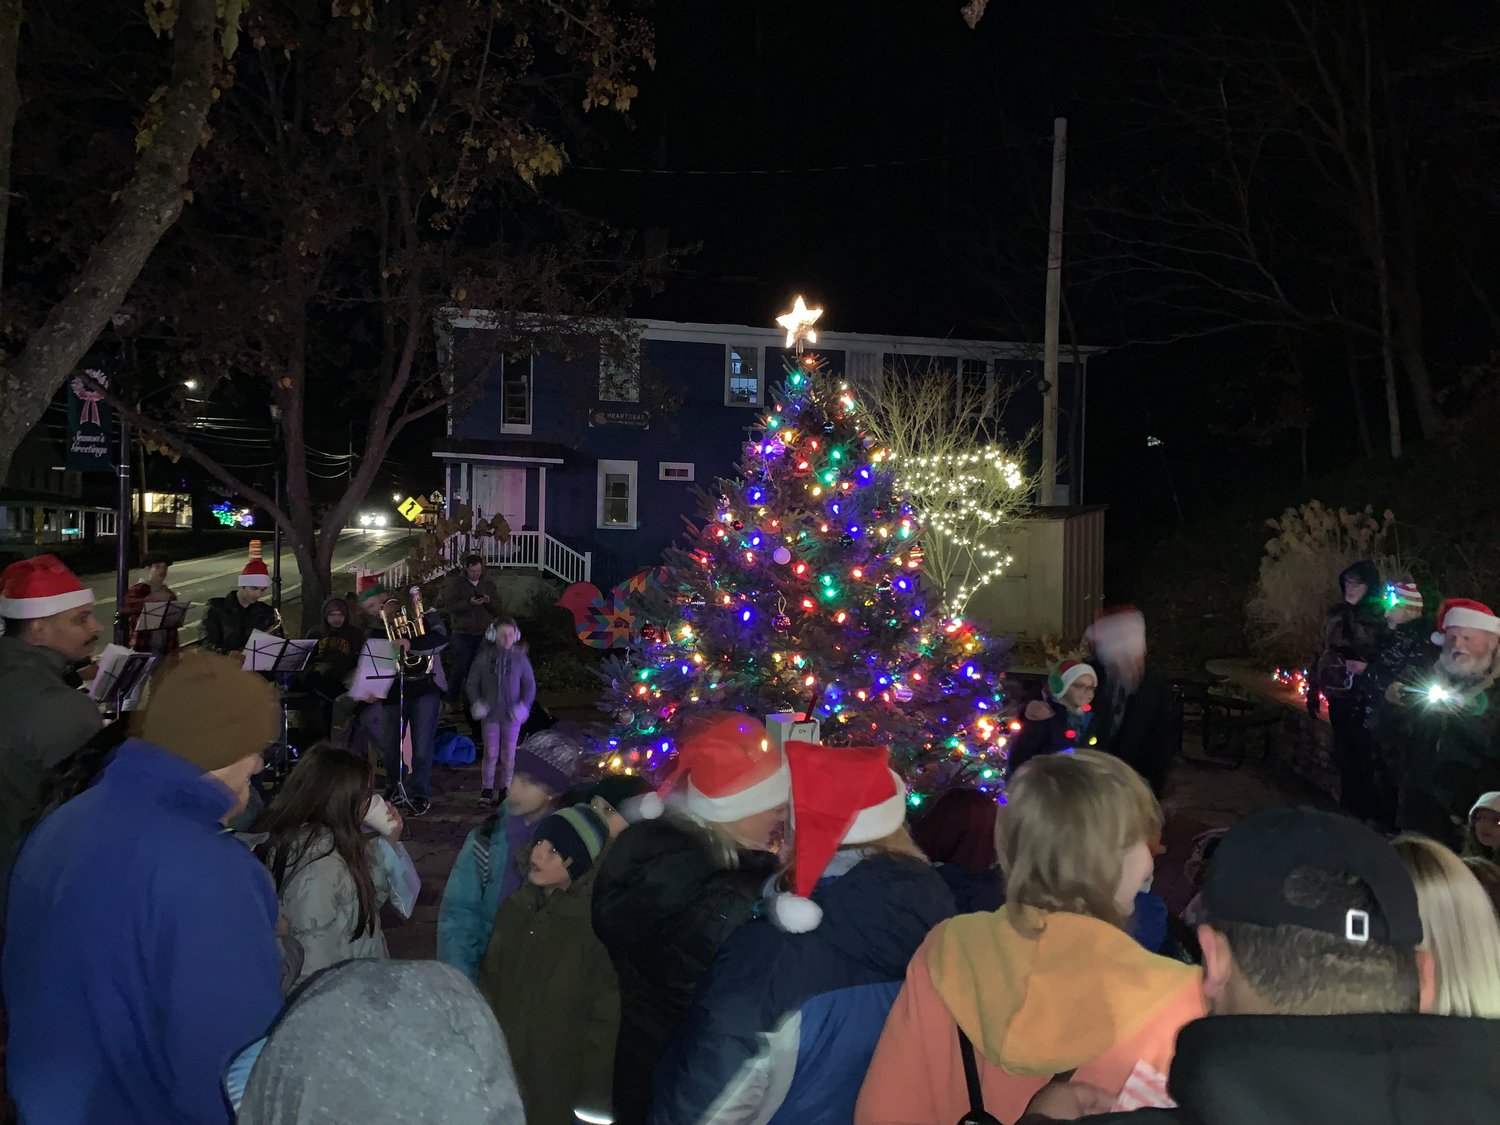 The Town of Neversink celebrated their annual holiday tree lighting at Bicentennial Park on Sunday evening.